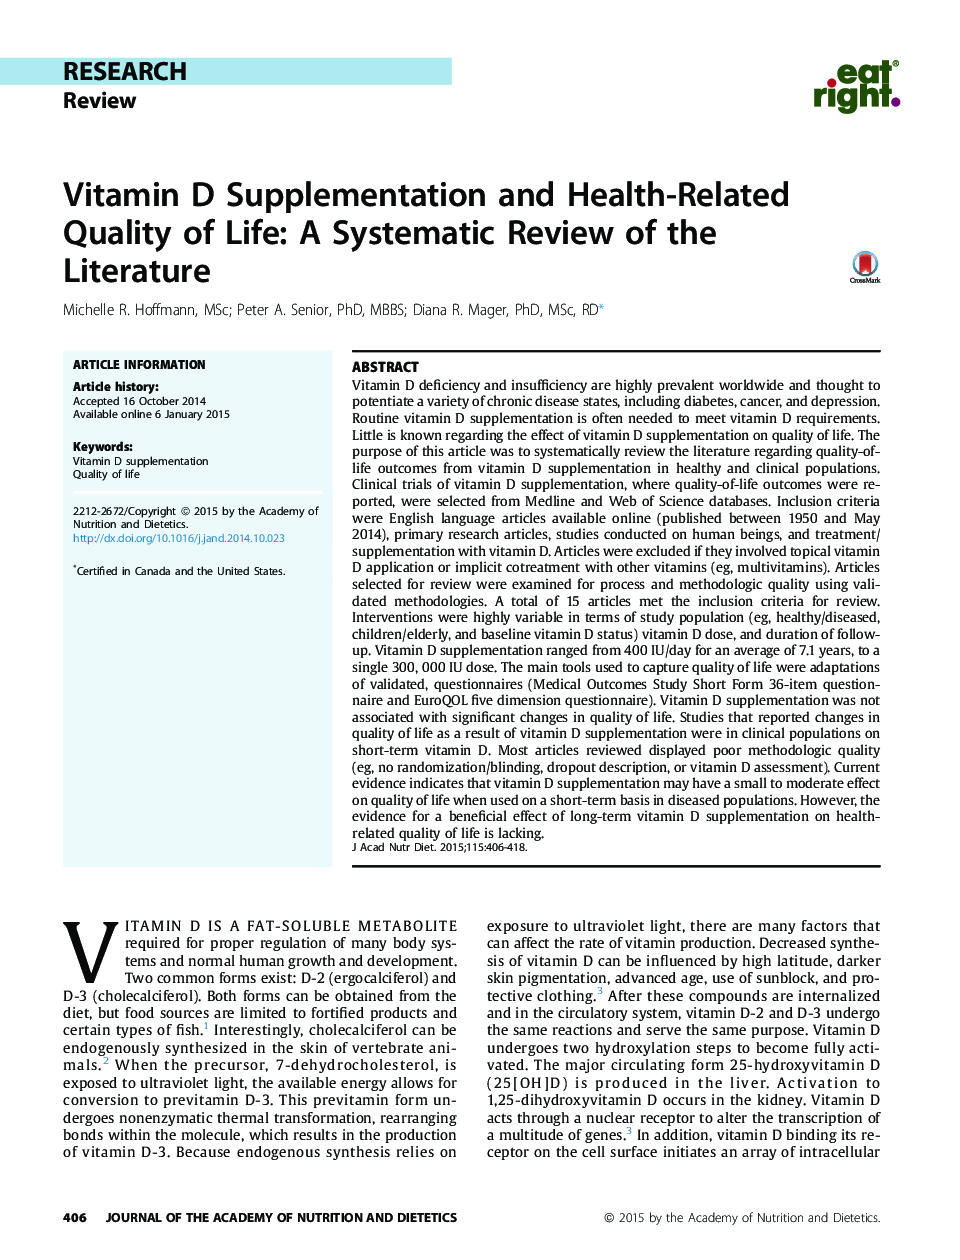 Vitamin D Supplementation and Health-Related Quality of Life: A Systematic Review of the Literature 